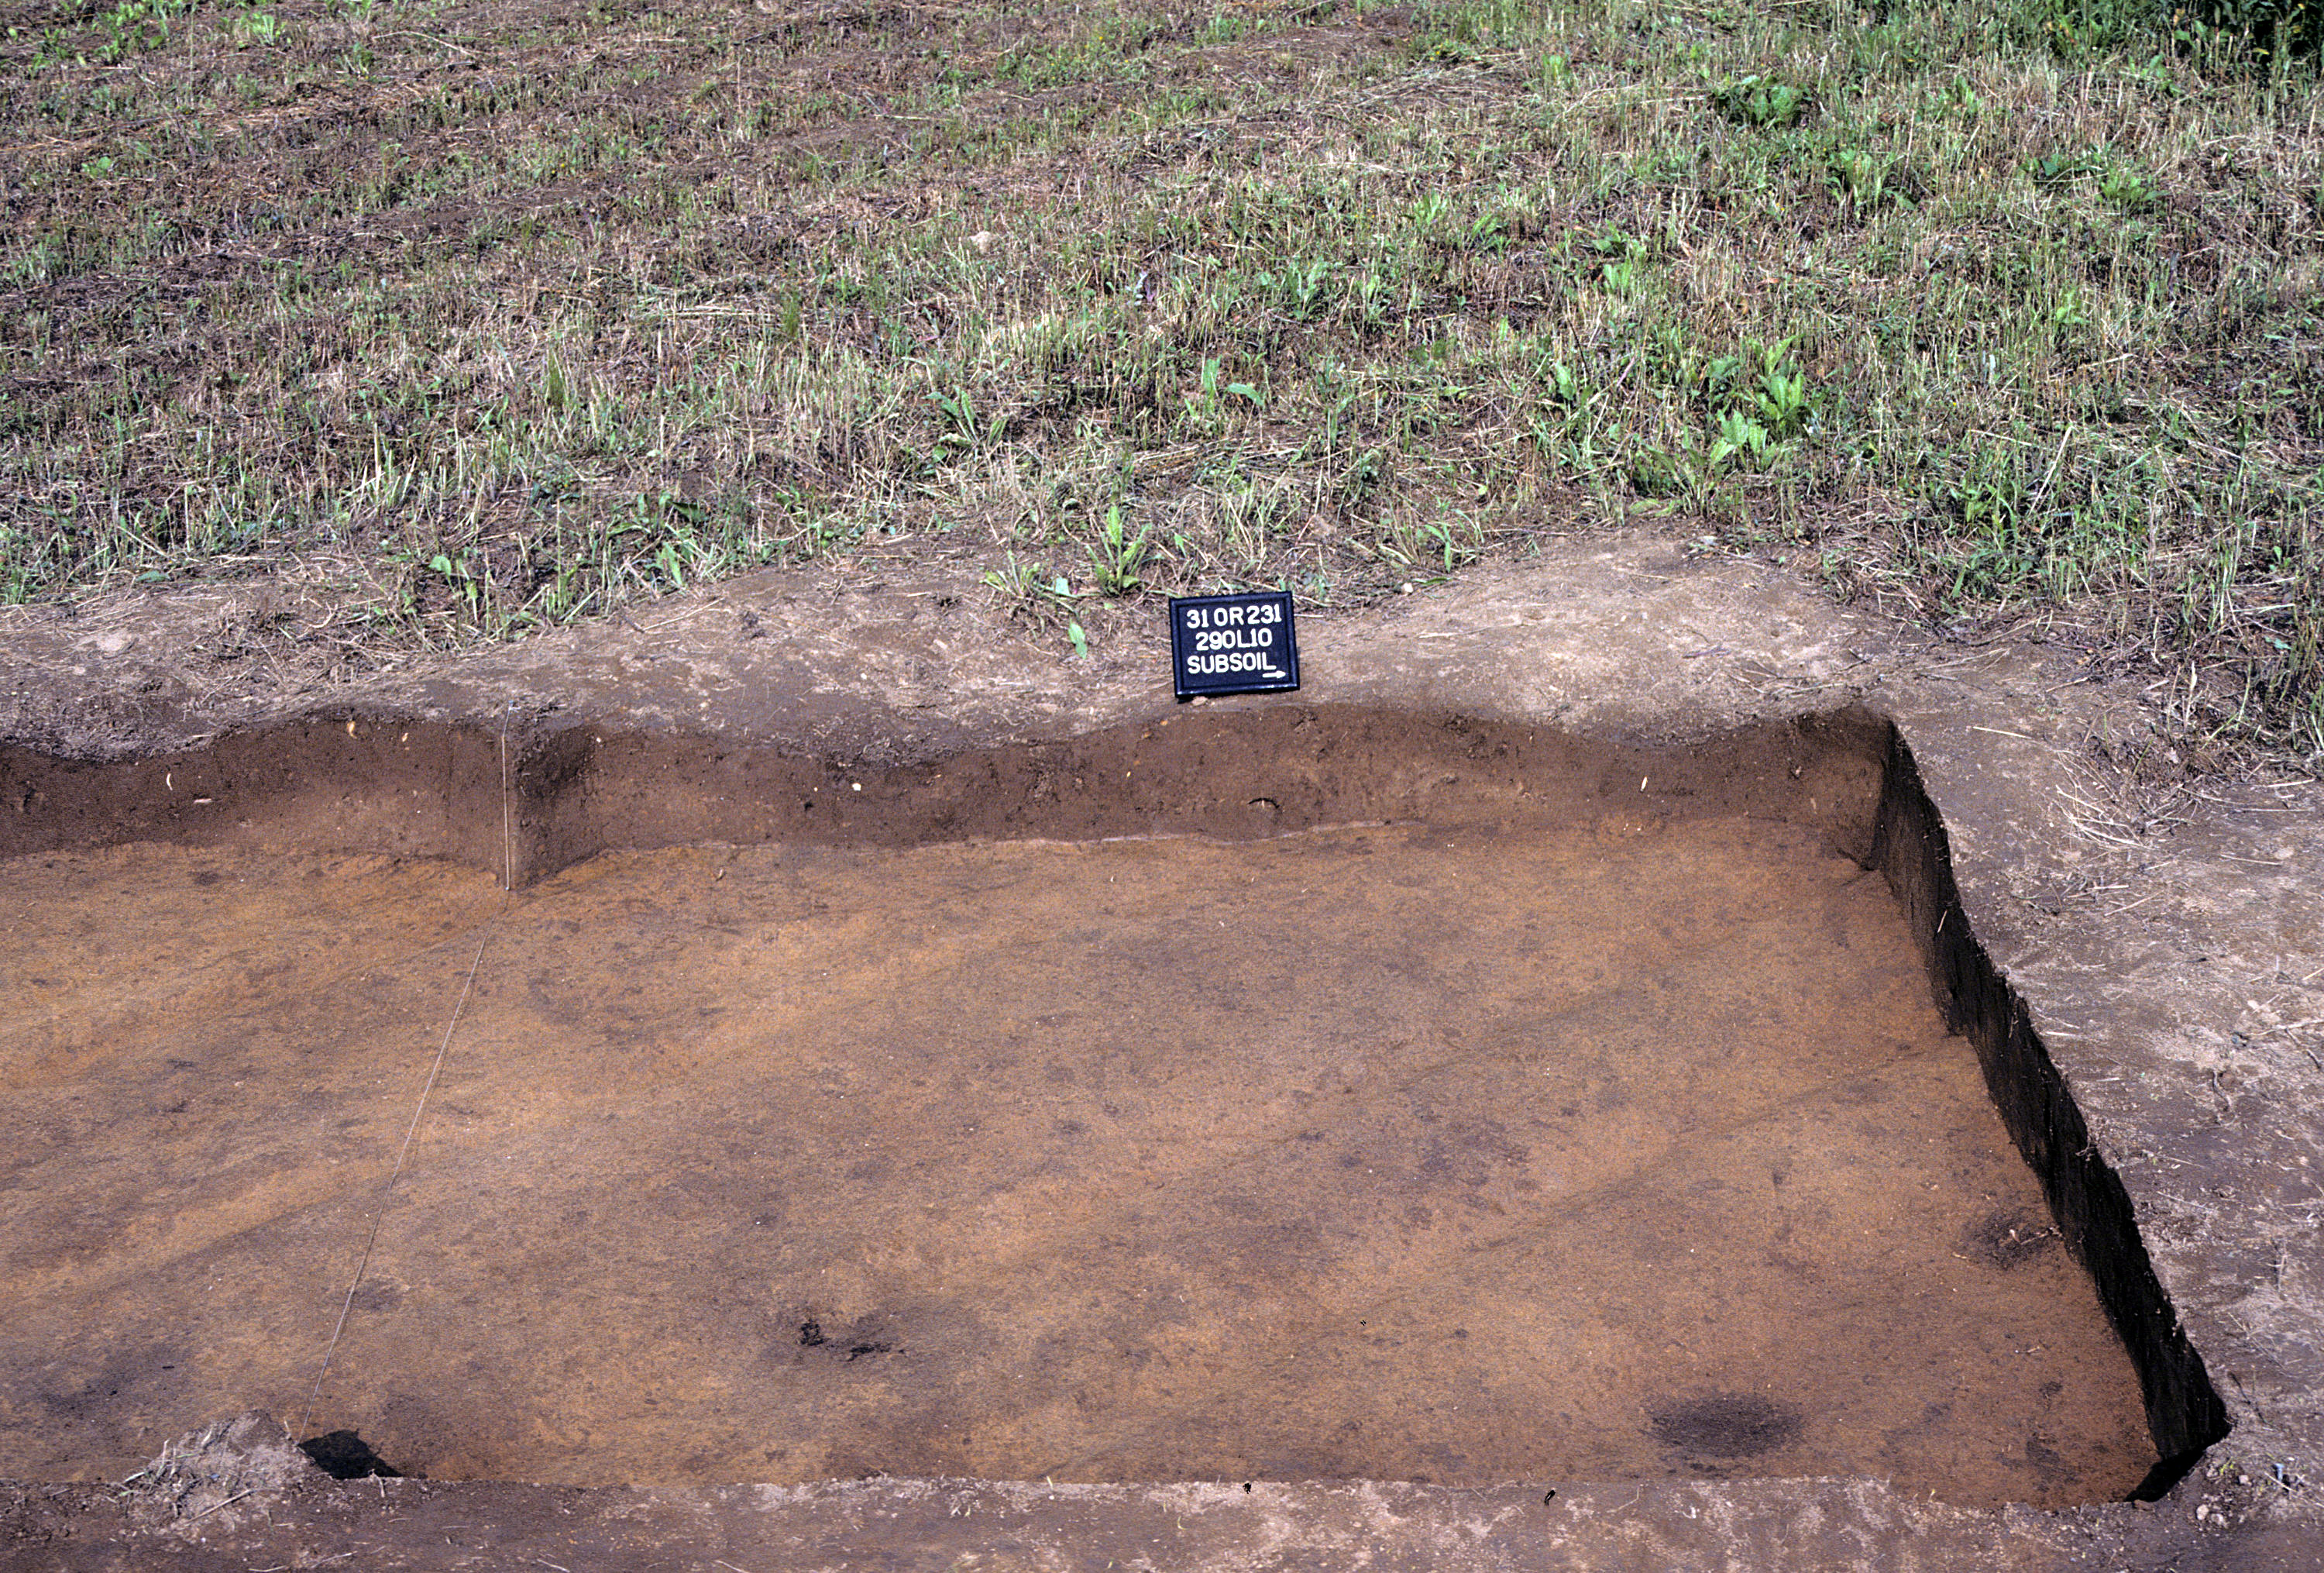 Figure 967. Sq. 290L10 at top of subsoil (view to west).